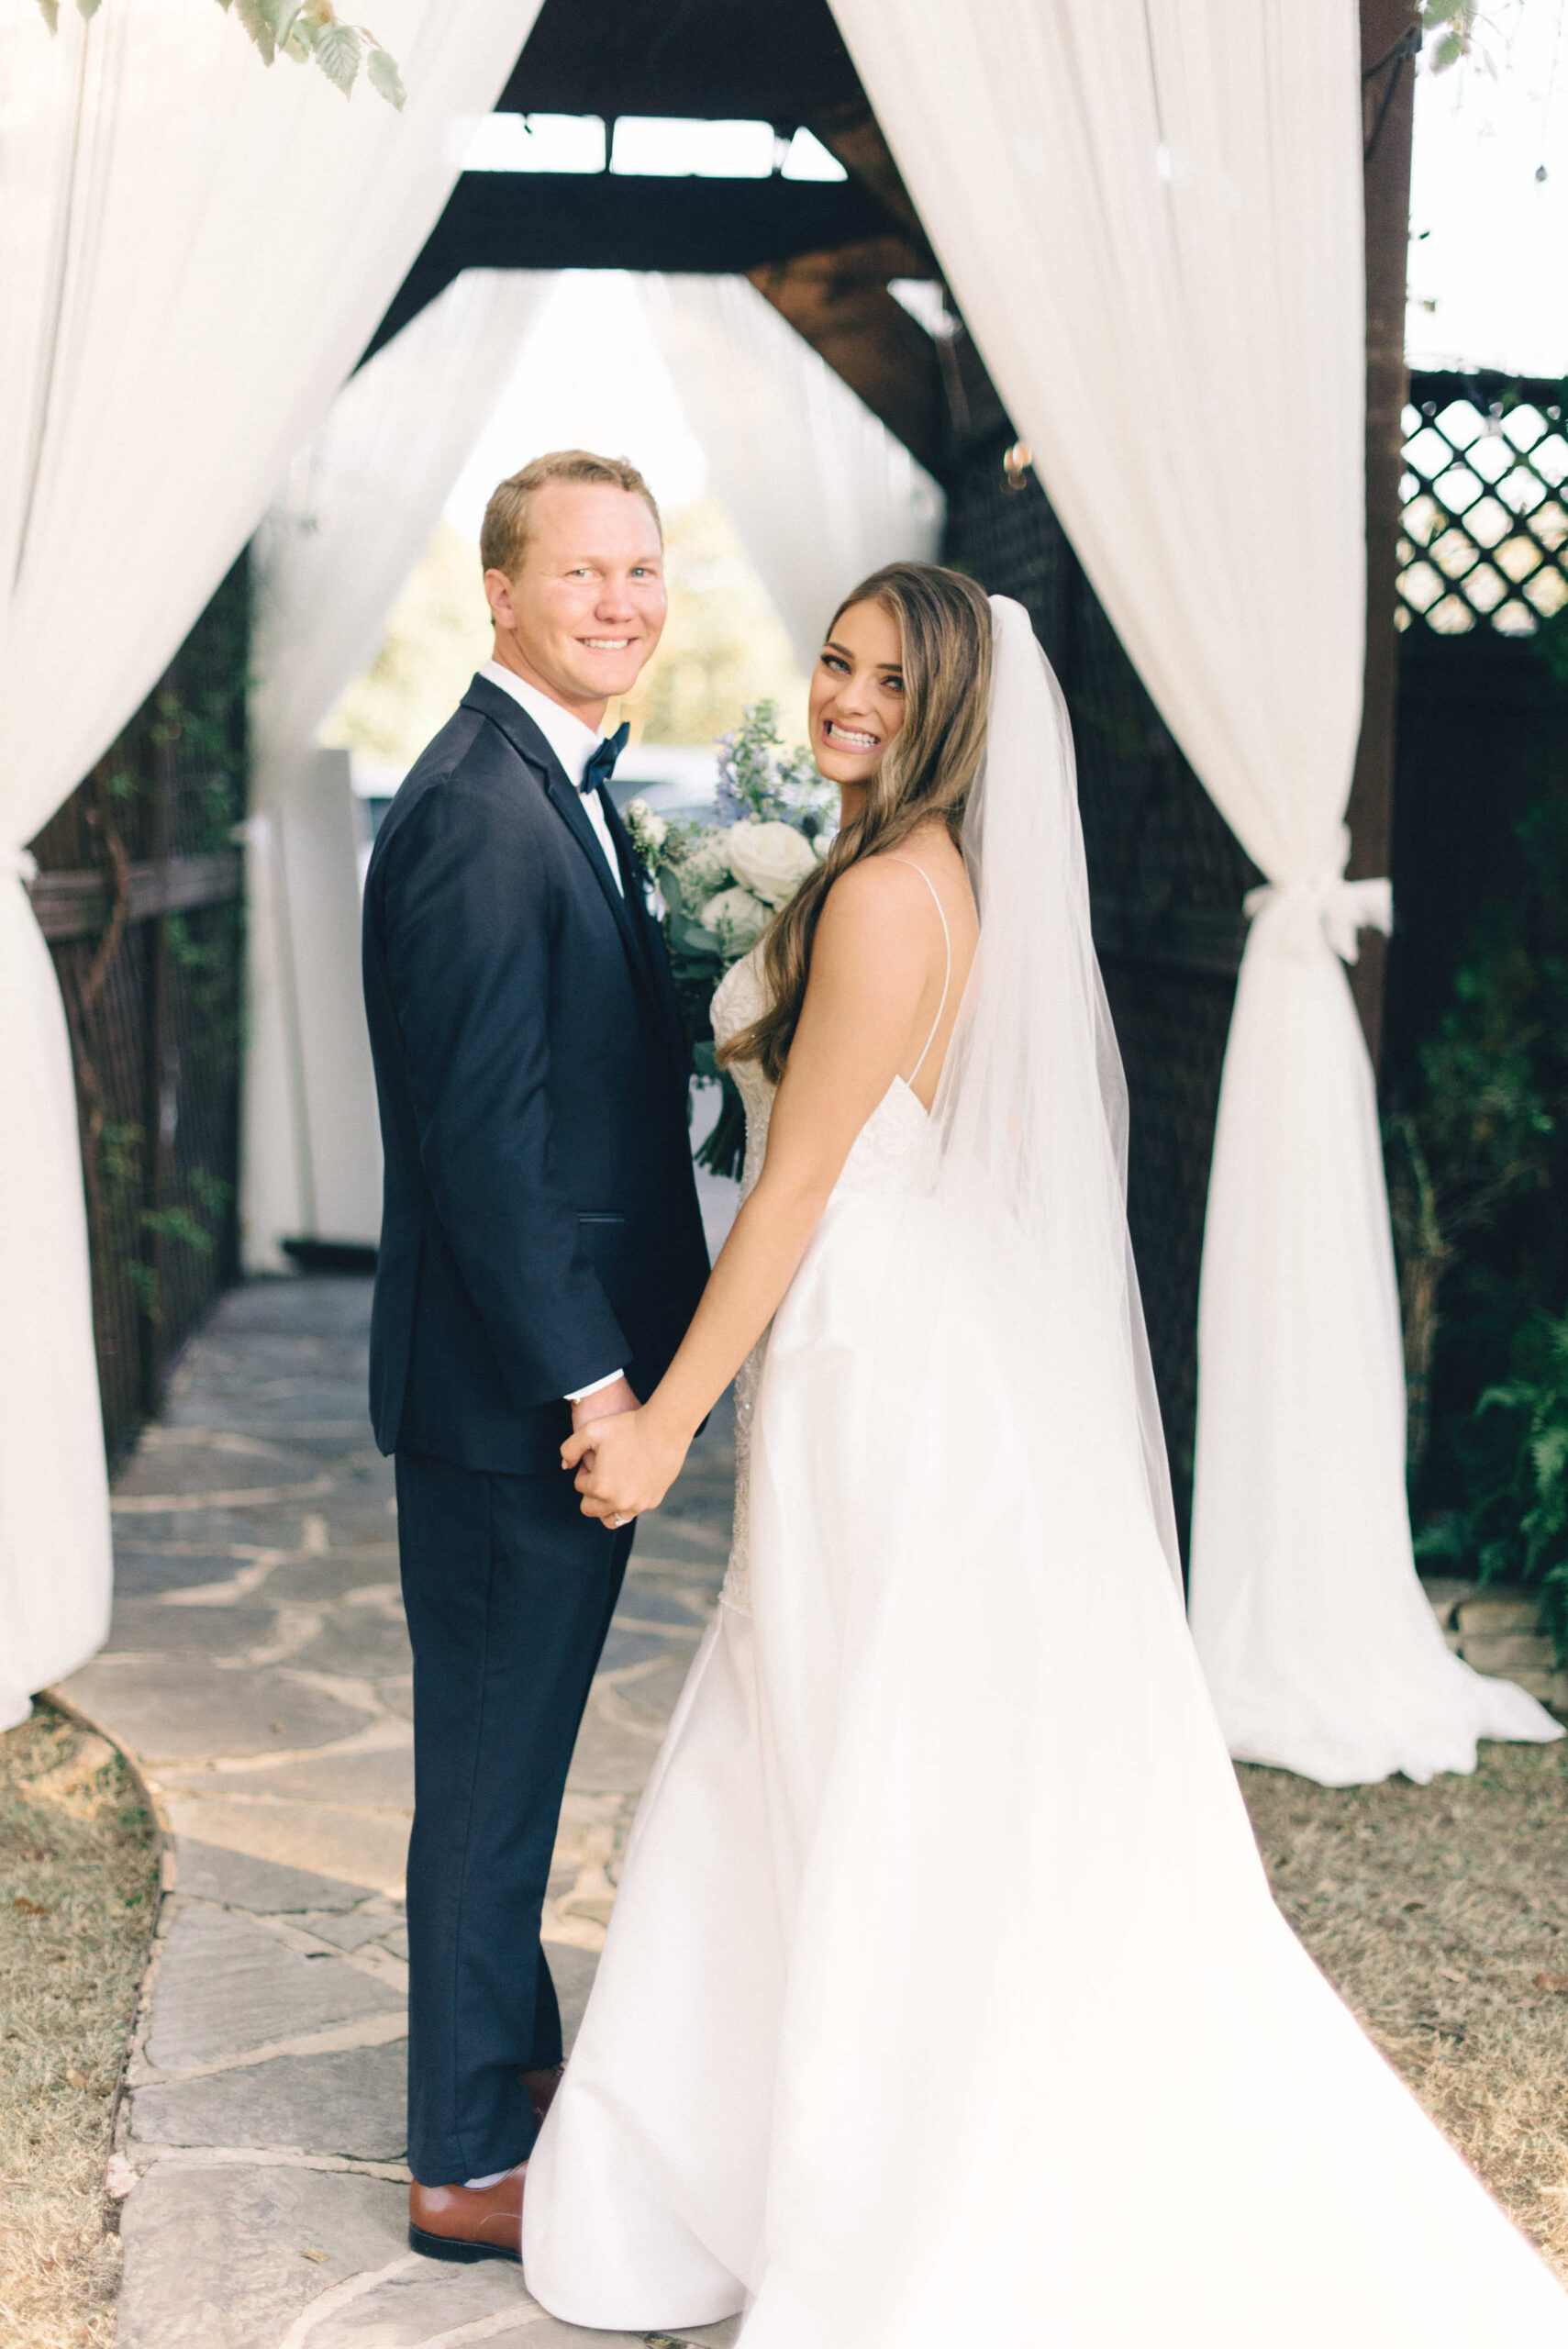 A wedding couple super happy and smiling at the camera immediately after they recessed down the aisle of their ceremony after vows and their kiss at Park Crest Events wedding venue